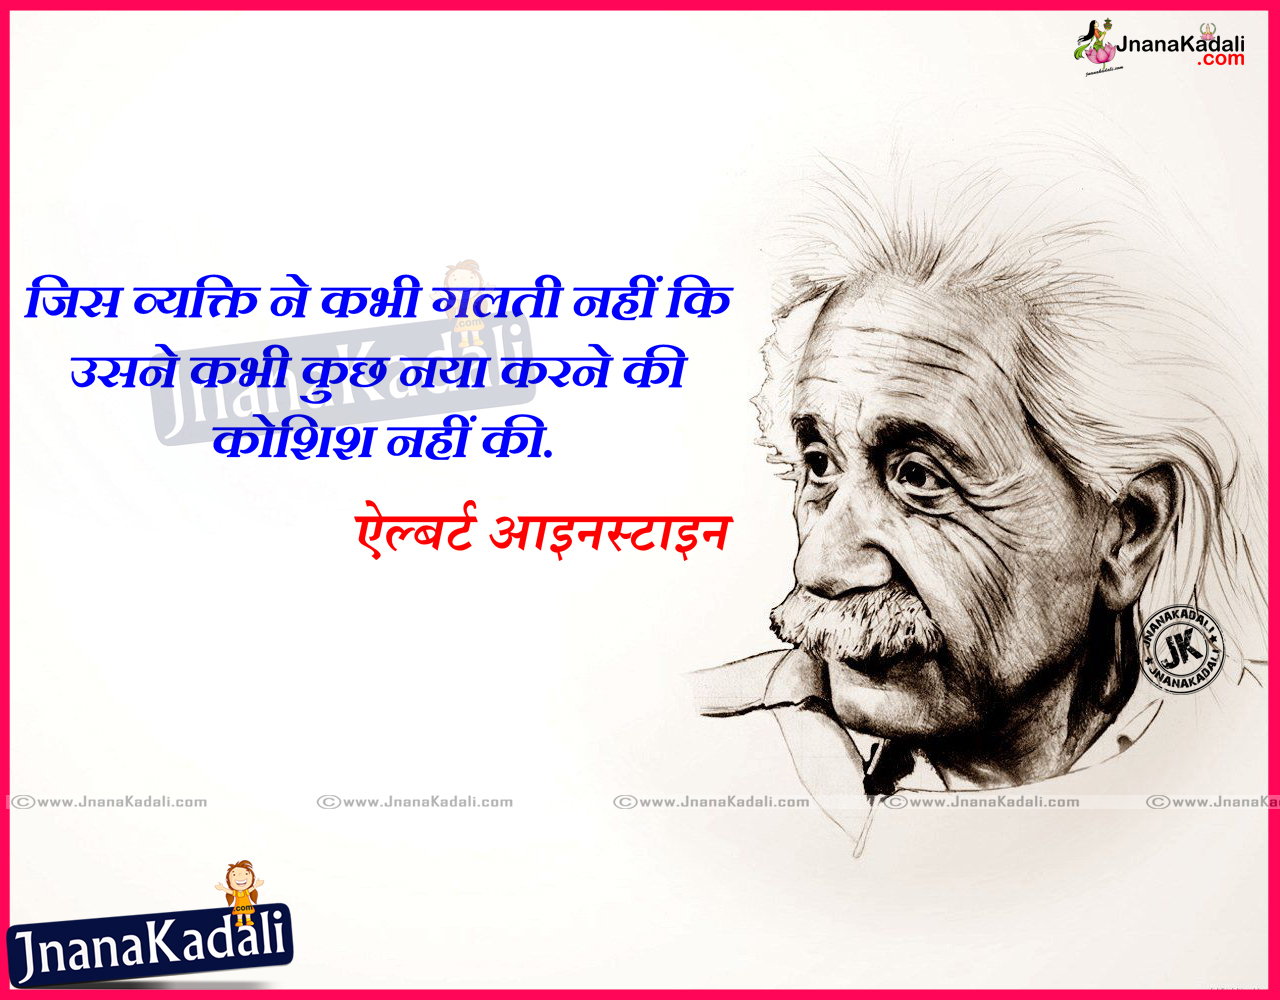 Einstein Best Time Value Quotations and Wallpapers Free | JNANA   |Telugu Quotes|English quotes|Hindi quotes|Tamil quotes|Dharmasandehalu|